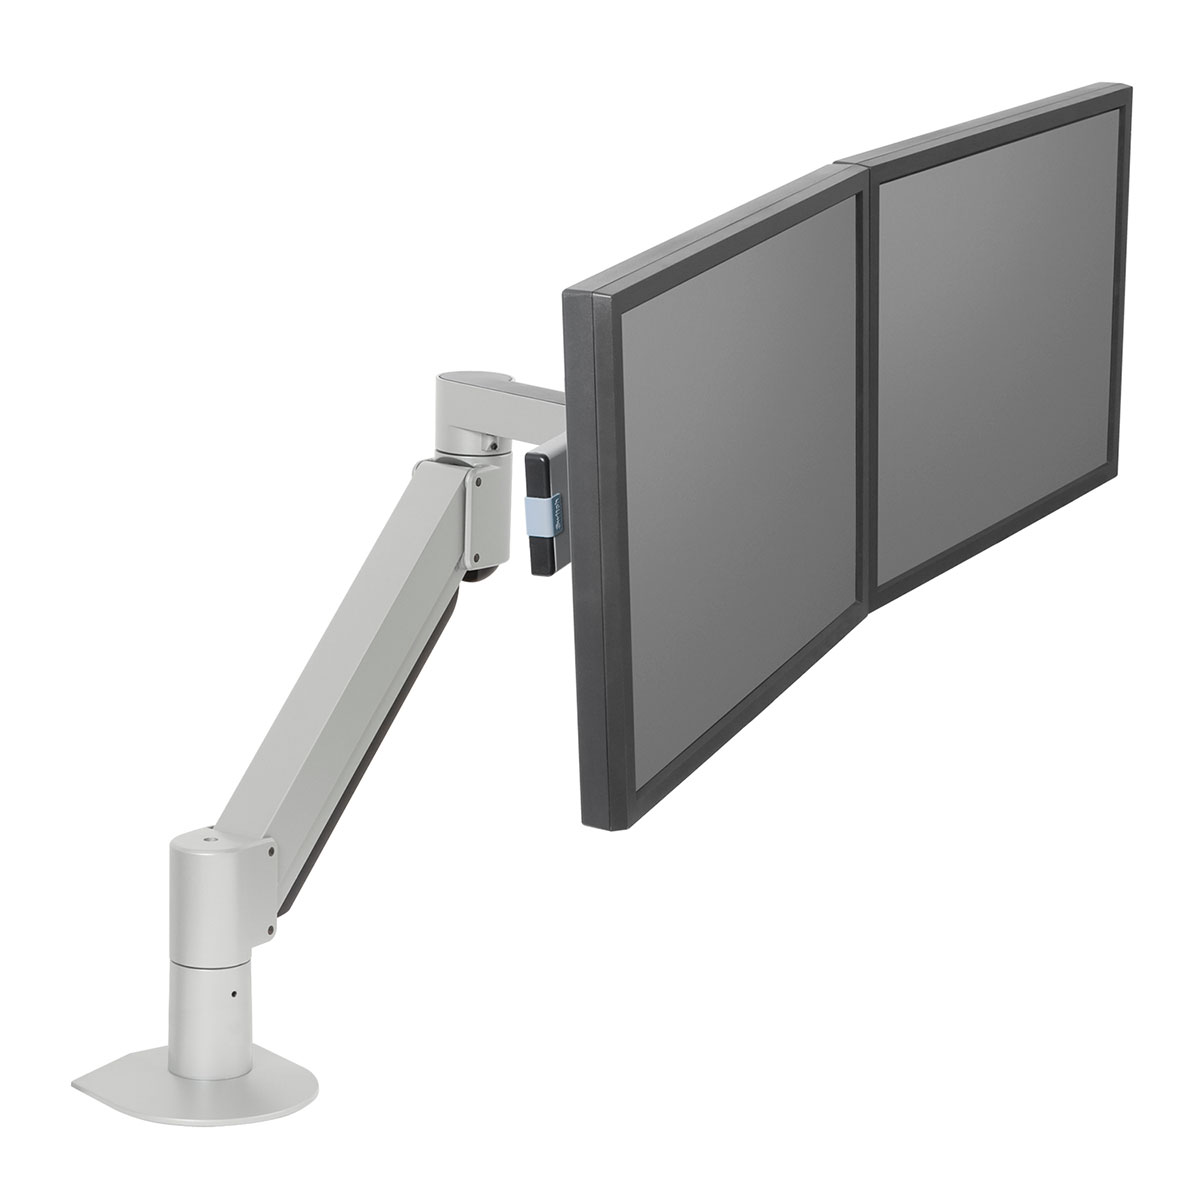 7500-Wing - Deluxe Dual Monitor Arm | HAT Design Works